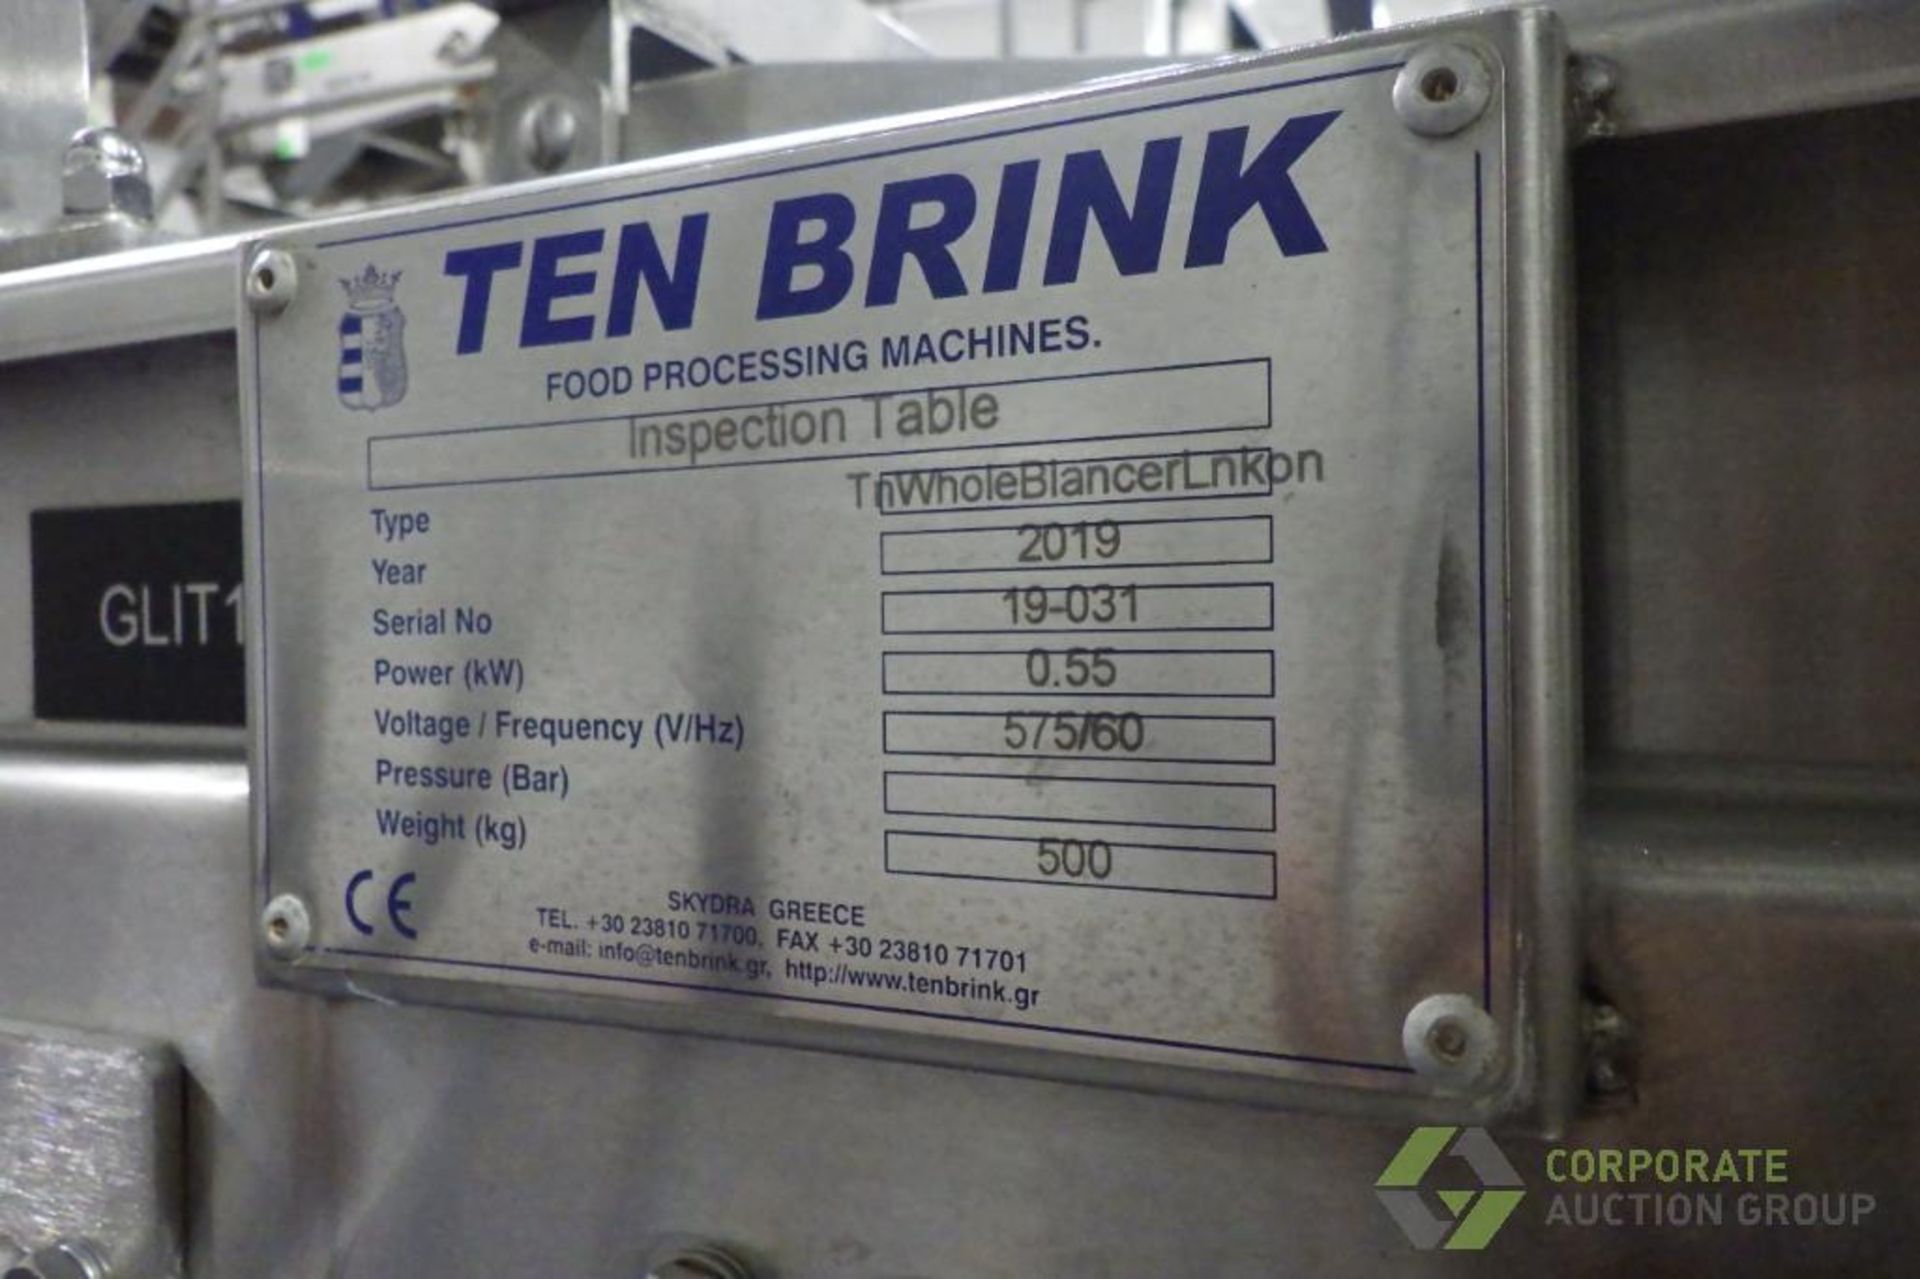 2019 Ten Brink inspection table - Image 13 of 19